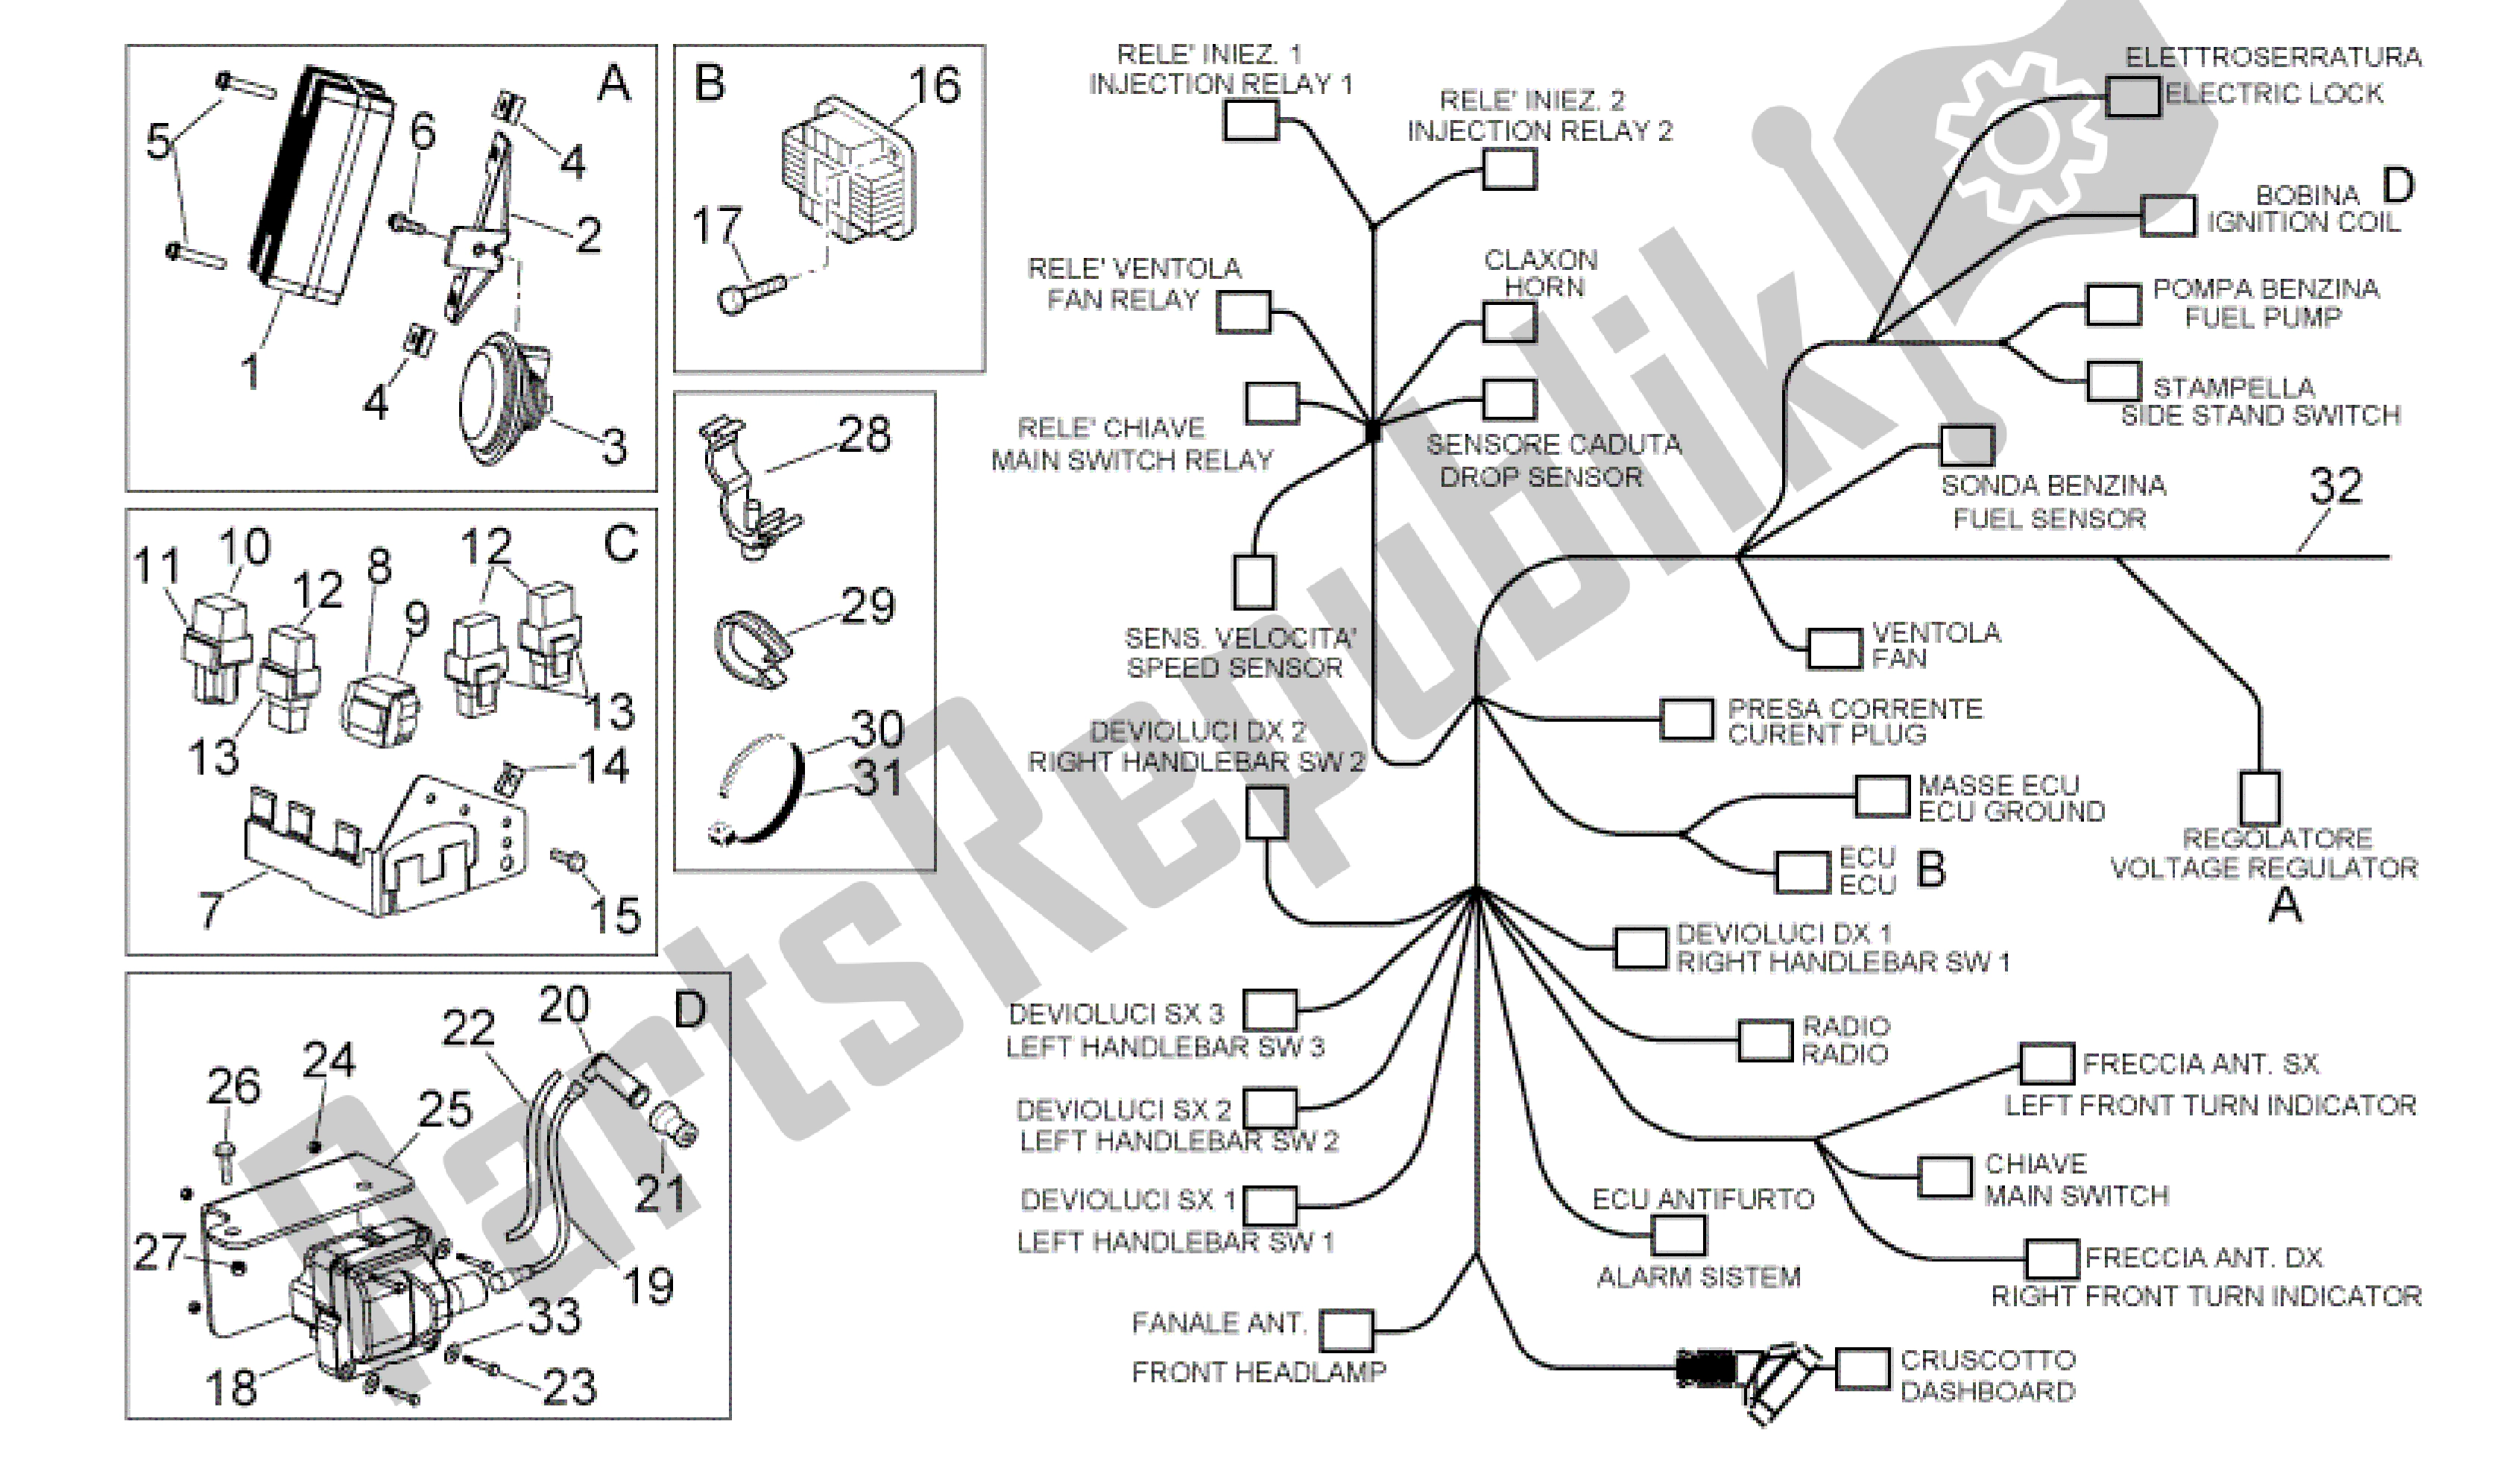 All parts for the Electrical System I of the Aprilia Scarabeo 500 2006 - 2008